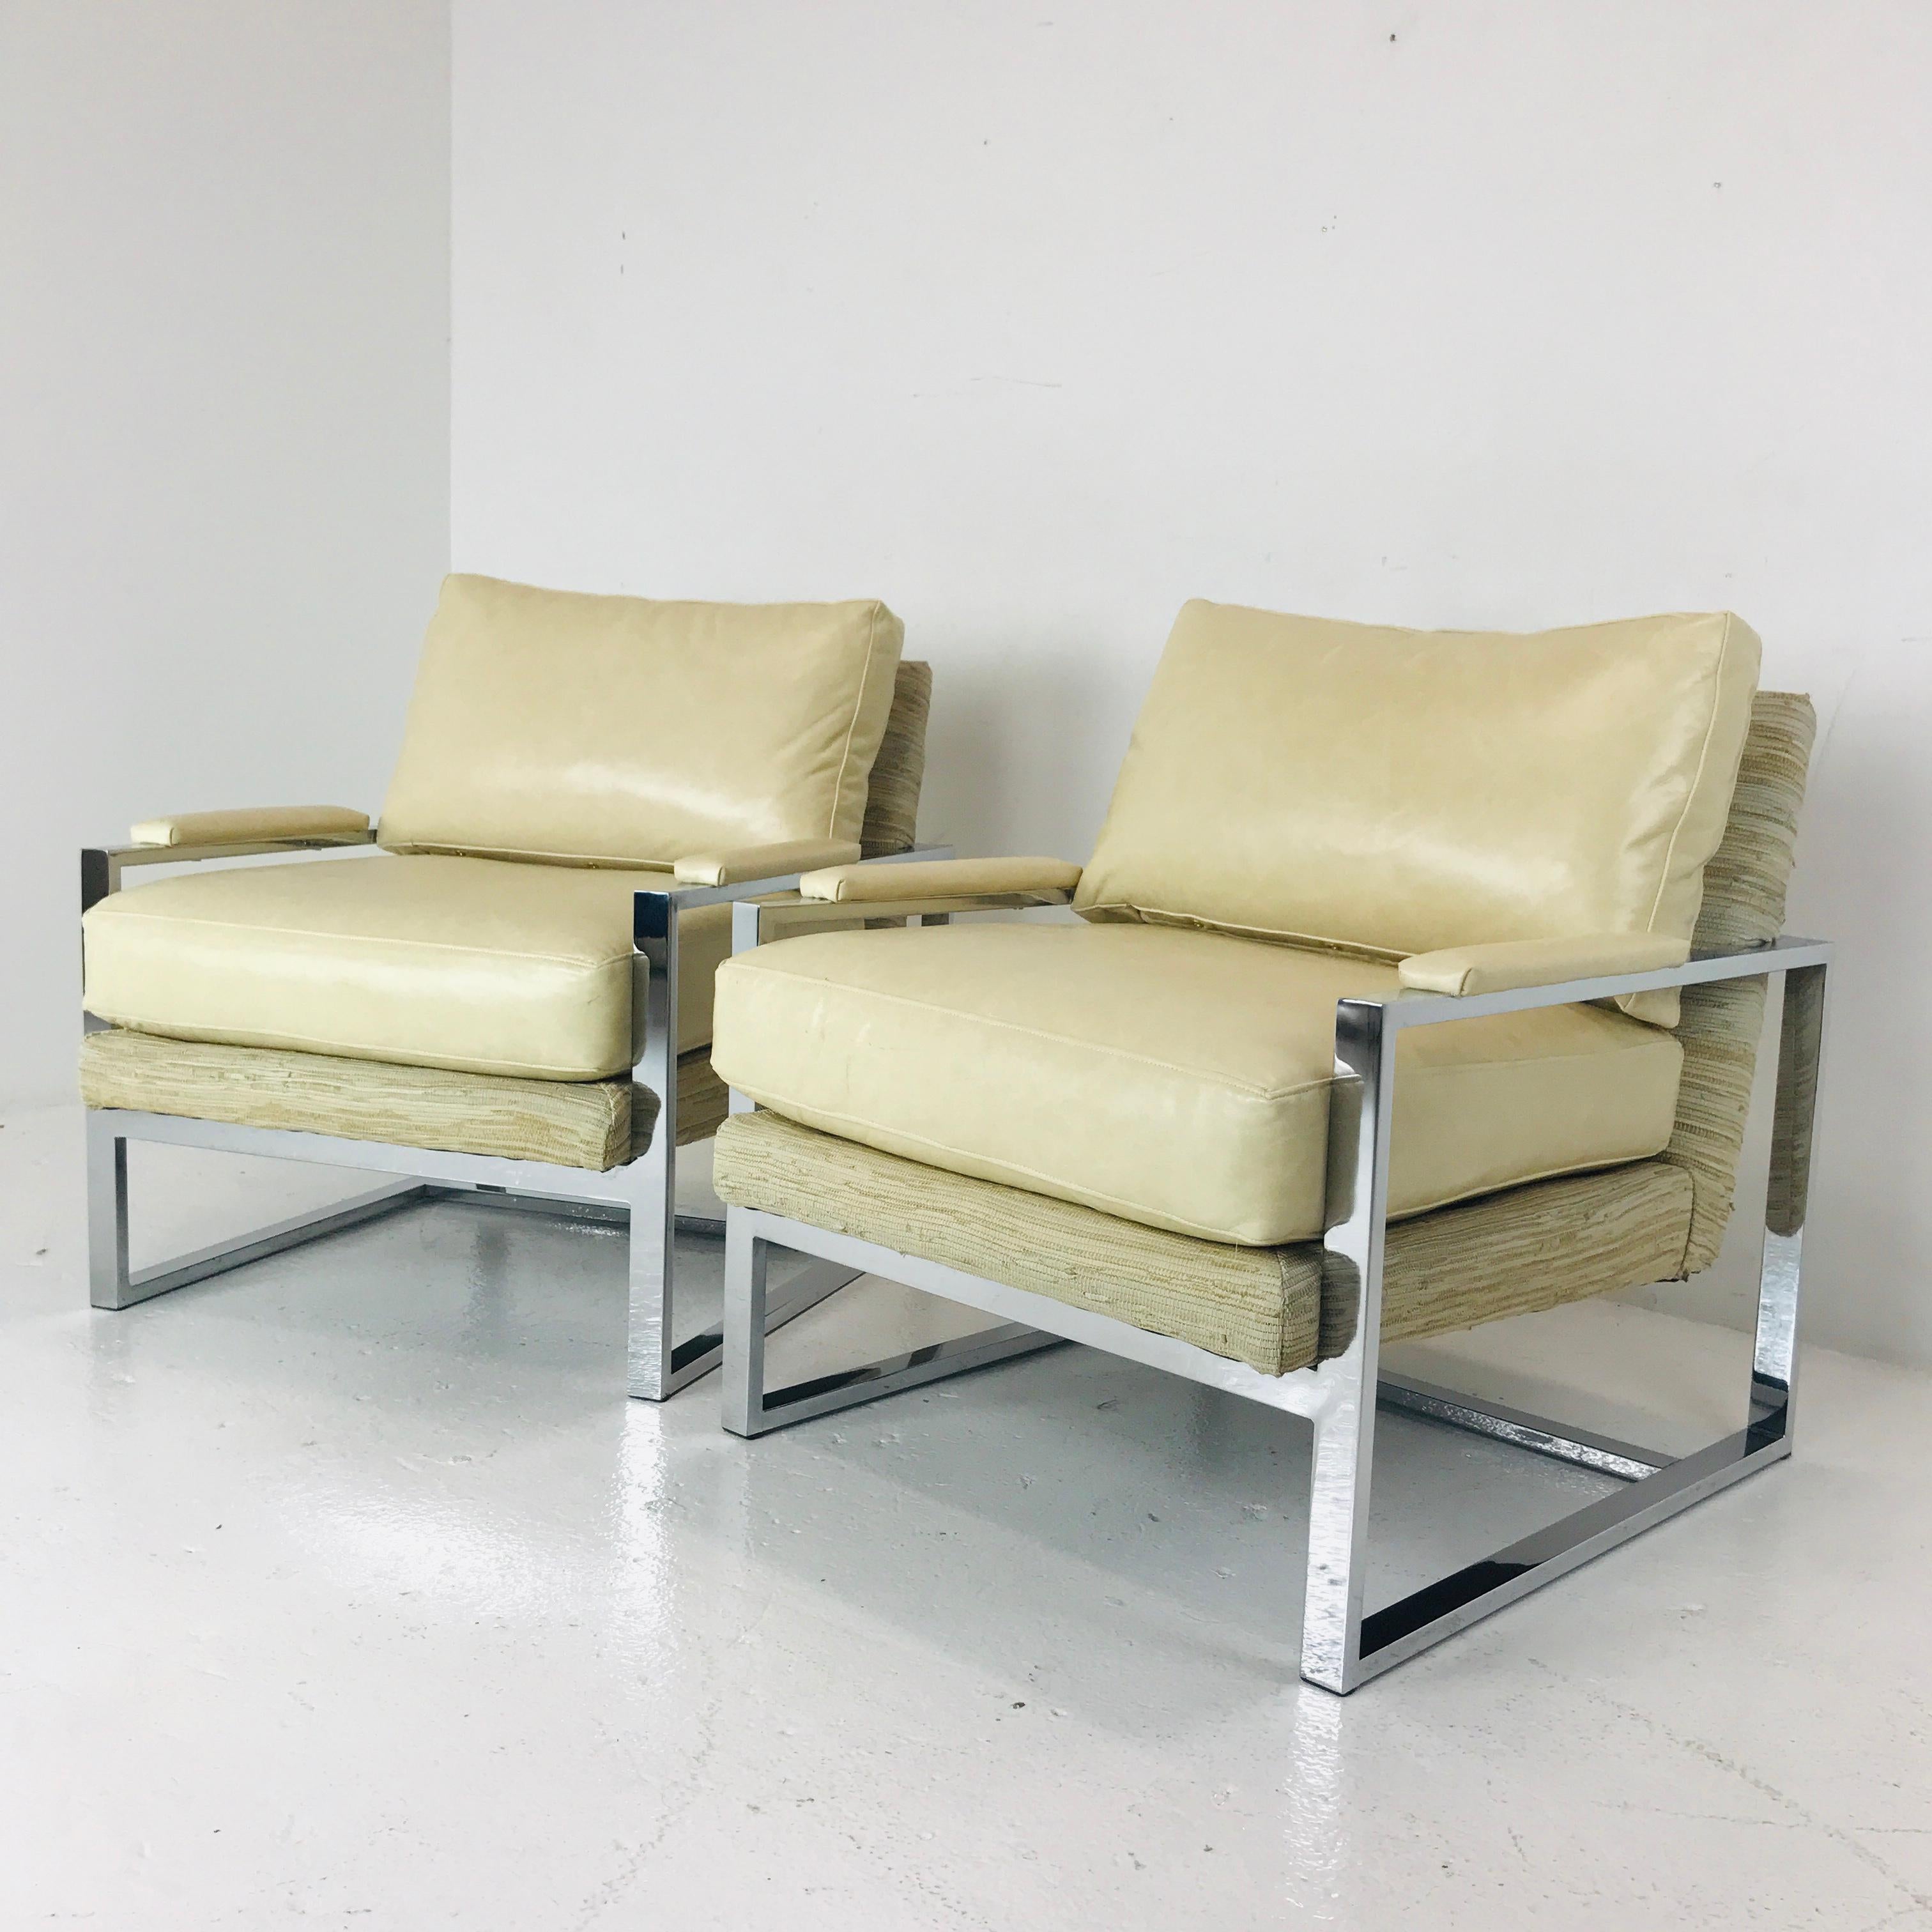 Pair of vintage Milo style chairs. Upholstery recommended.